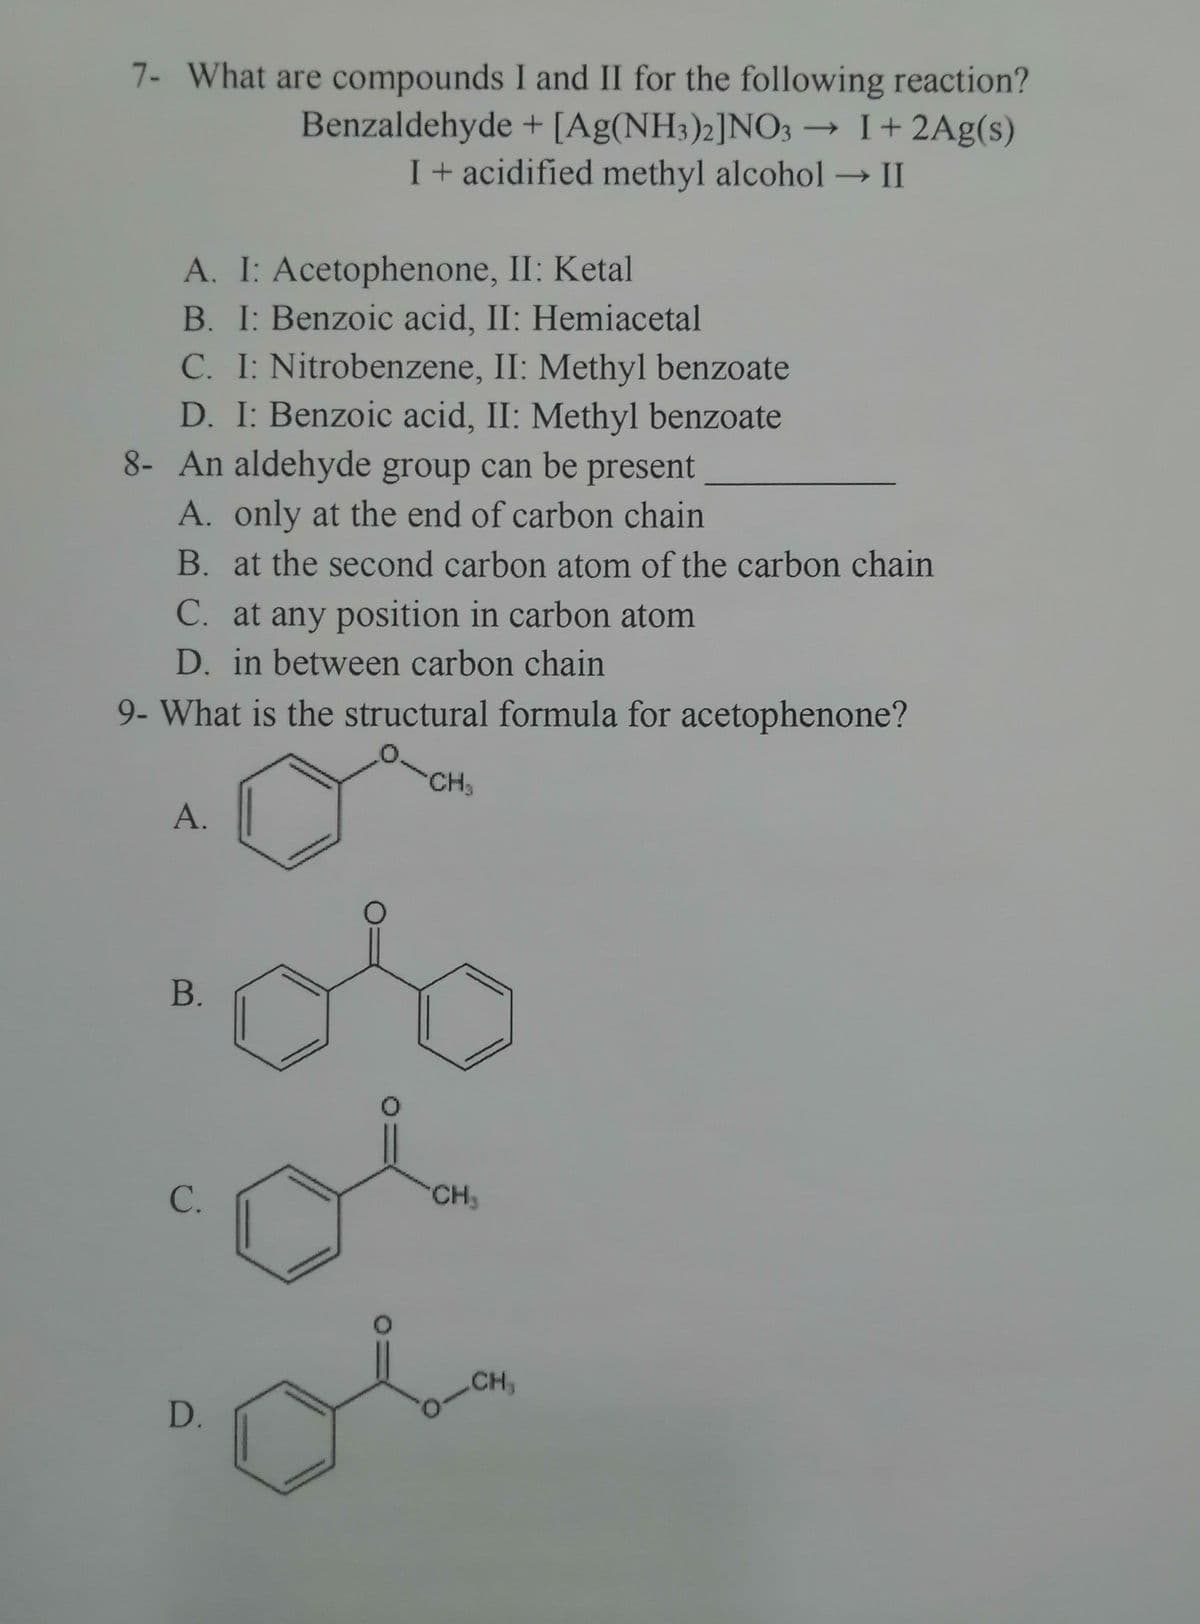 7- What are compounds I and II for the following reaction?
Benzaldehyde + [Ag(NH3)2]NO3 → I+ 2Ag(s)
I + acidified methyl alcohol → II
-
A. I: Acetophenone, II: Ketal
B. I: Benzoic acid, II: Hemiacetal
C. I: Nitrobenzene, II: Methyl benzoate
D. I: Benzoic acid, II: Methyl benzoate
8- An aldehyde group can be present
A. only at the end of carbon chain
B. at the second carbon atom of the carbon chain
C. at any position in carbon atom
D. in between carbon chain
9- What is the structural formula for acetophenone?
CH₂
A.
B.
C.
D.
O
O
CH₂
CH₂